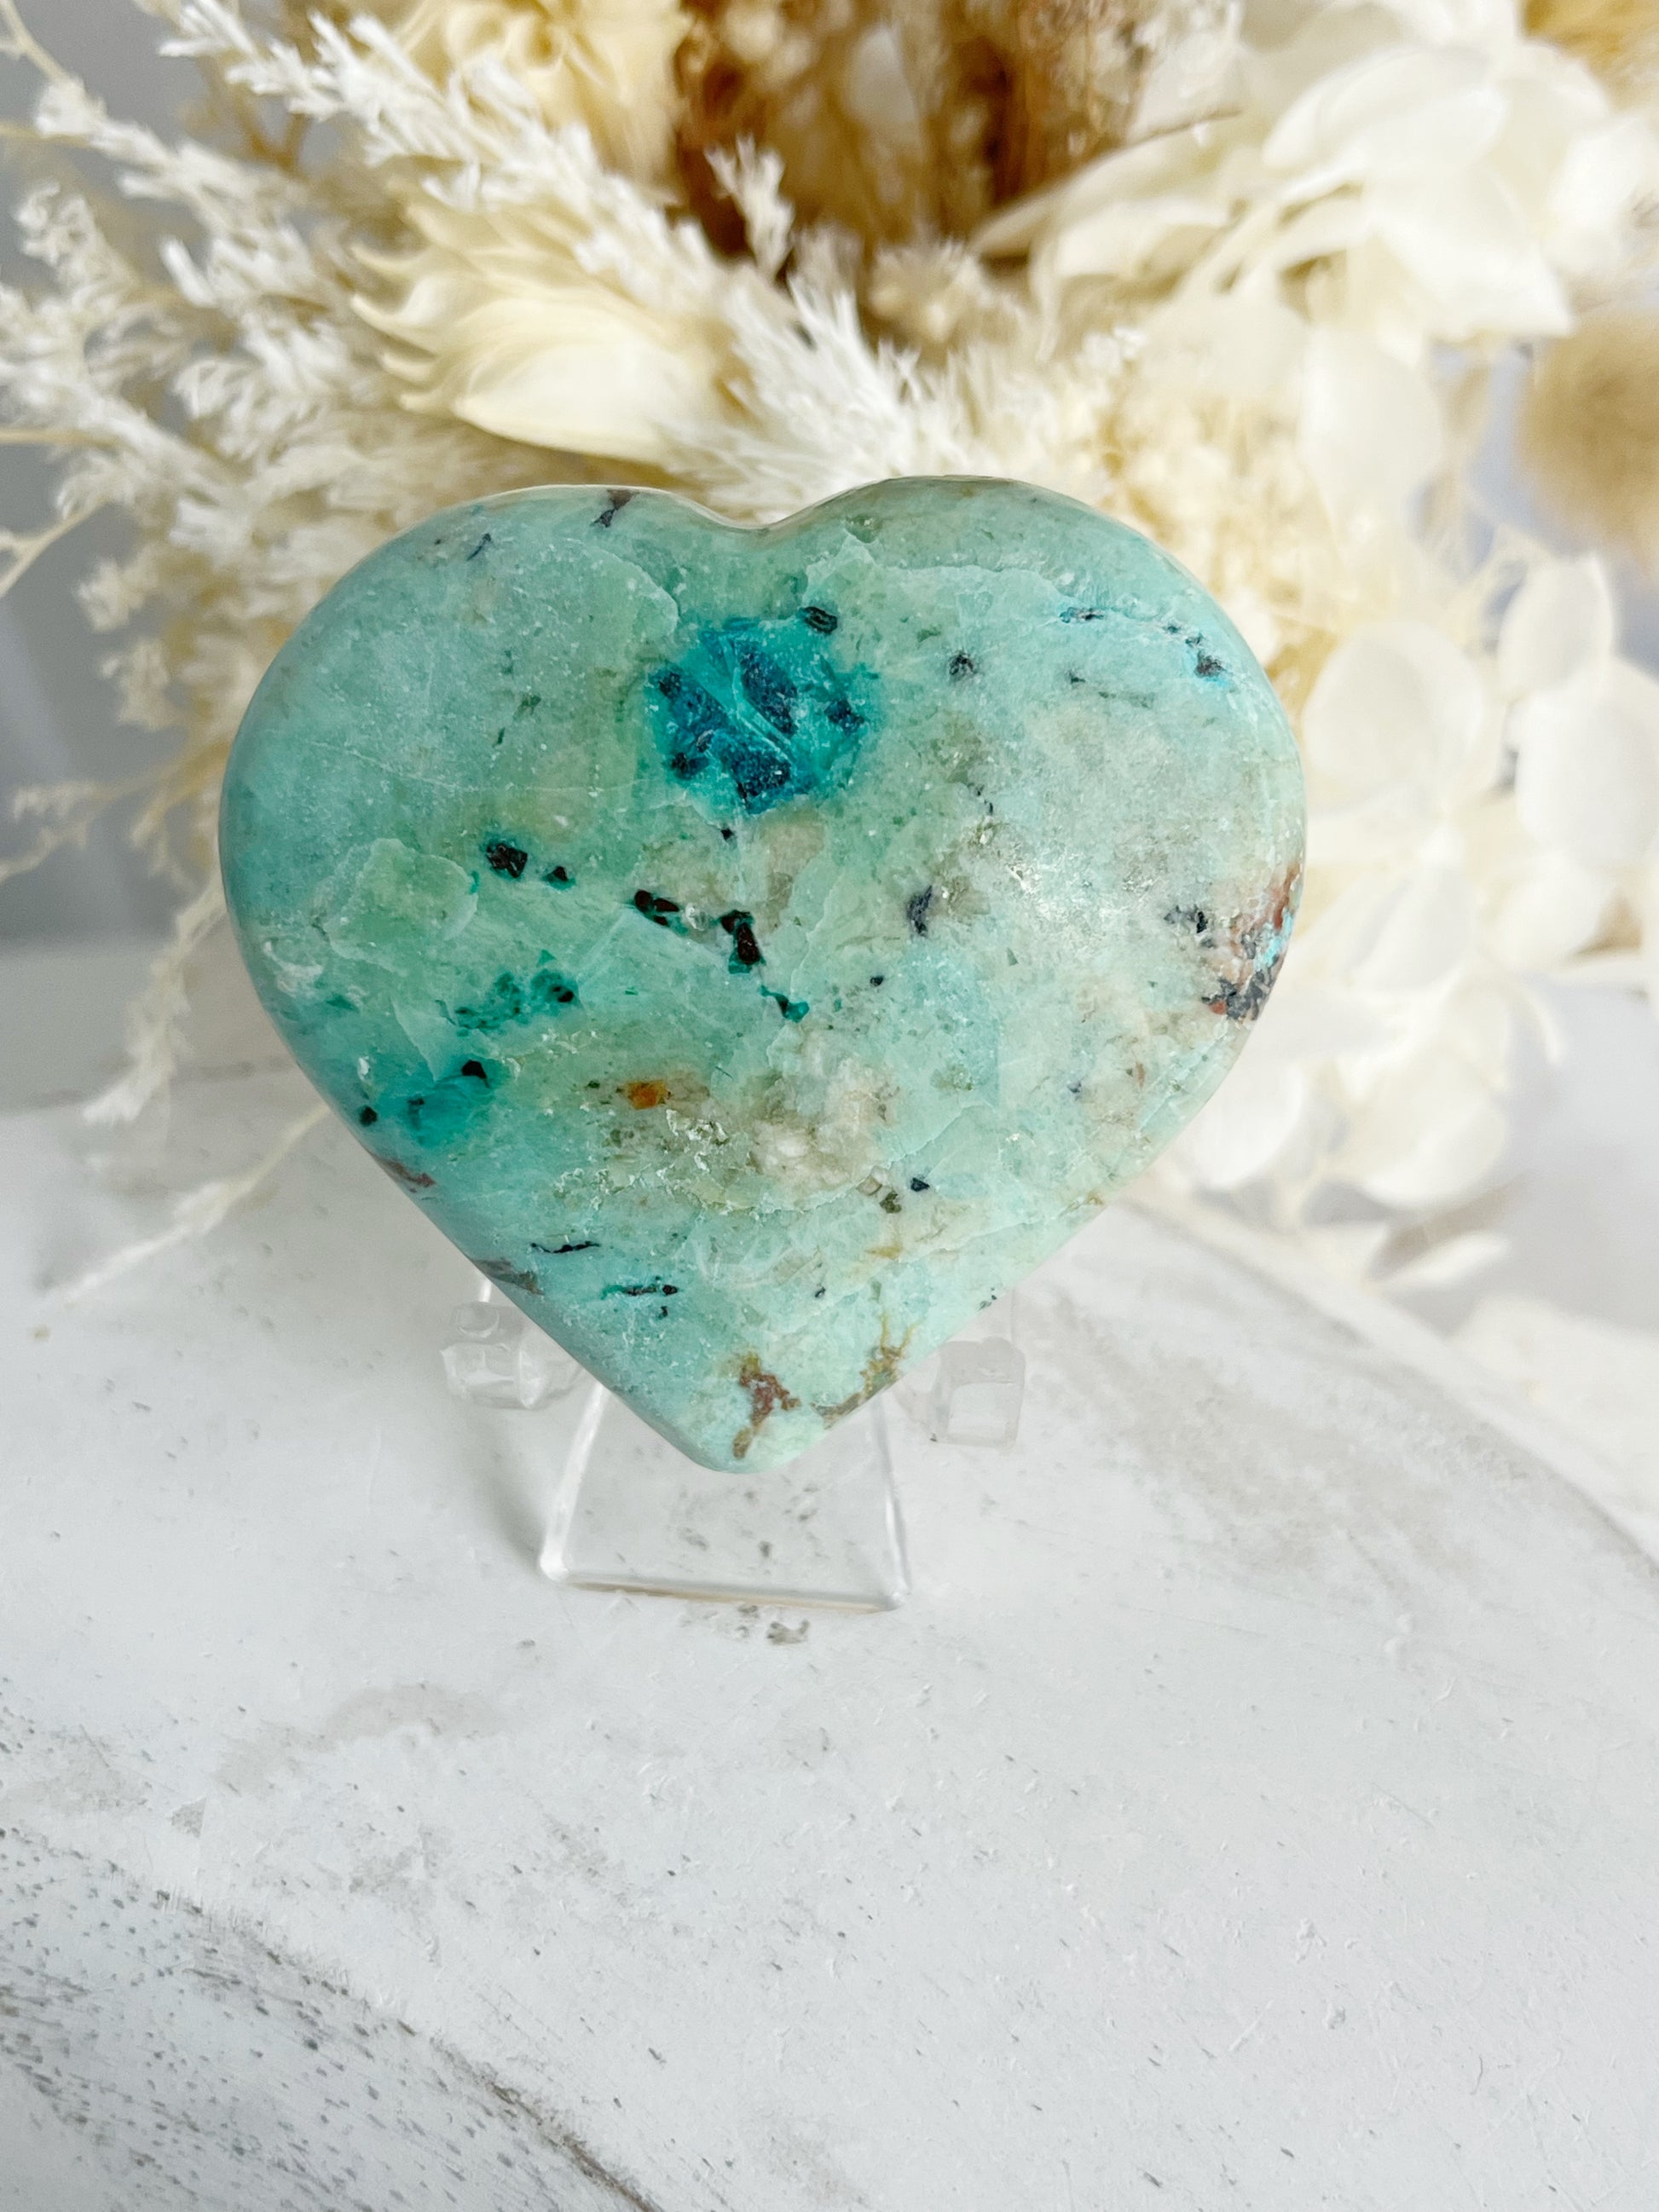 PERUVIAN TURQUOISE HEART, STONED AND SAGED CRYSTAL SHOP AUSTRALIA. TURQUOISE 